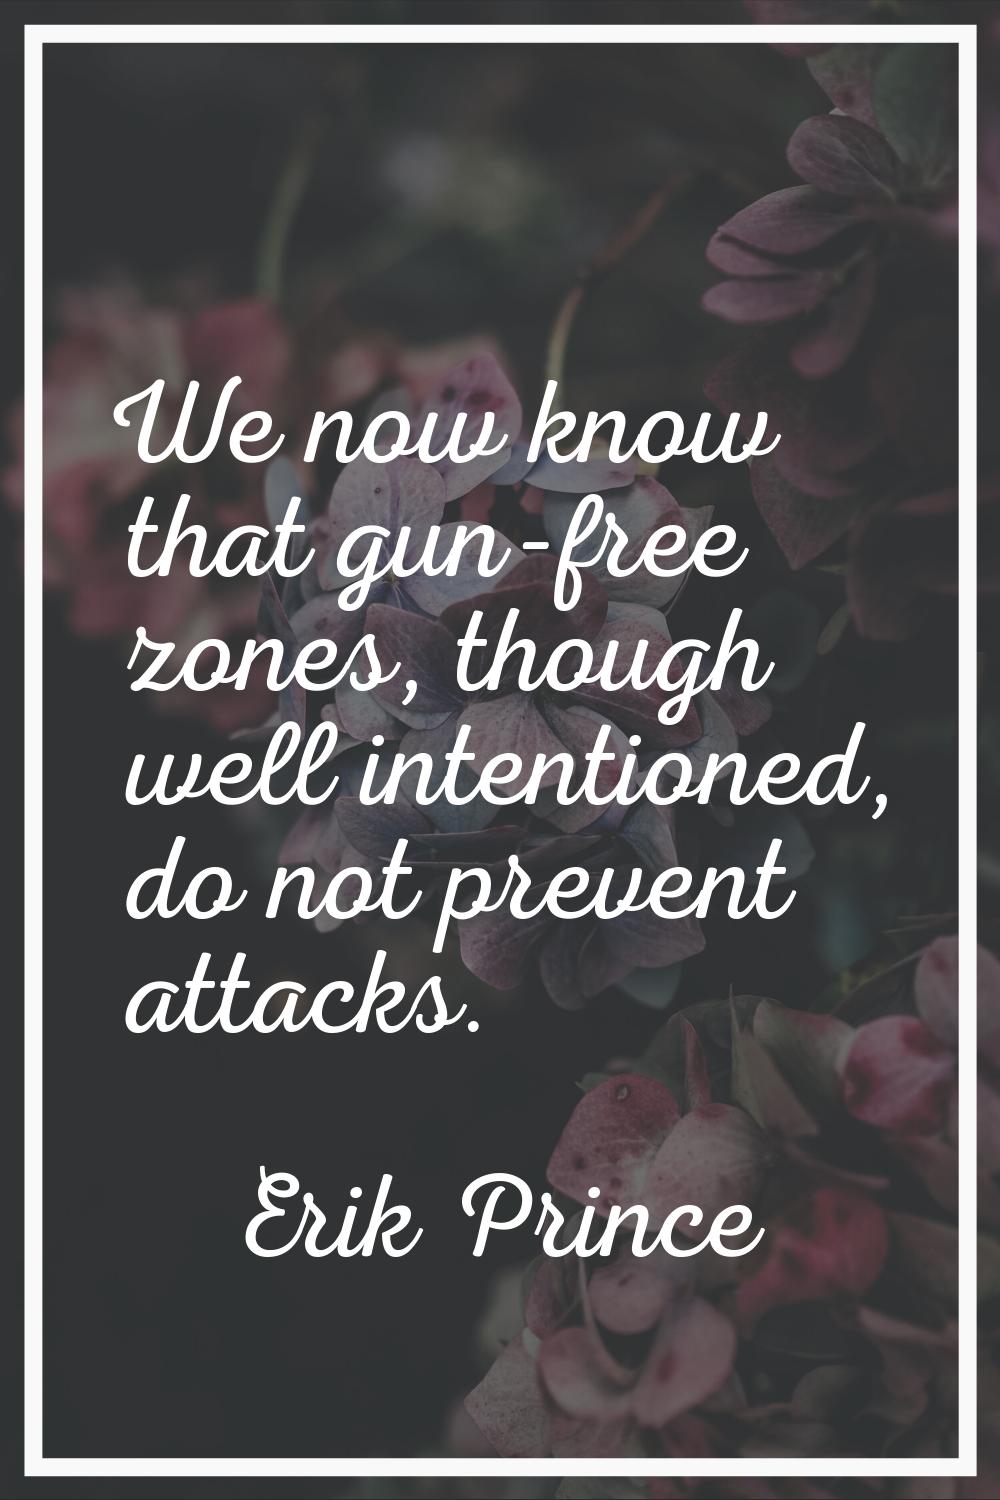 We now know that gun-free zones, though well intentioned, do not prevent attacks.